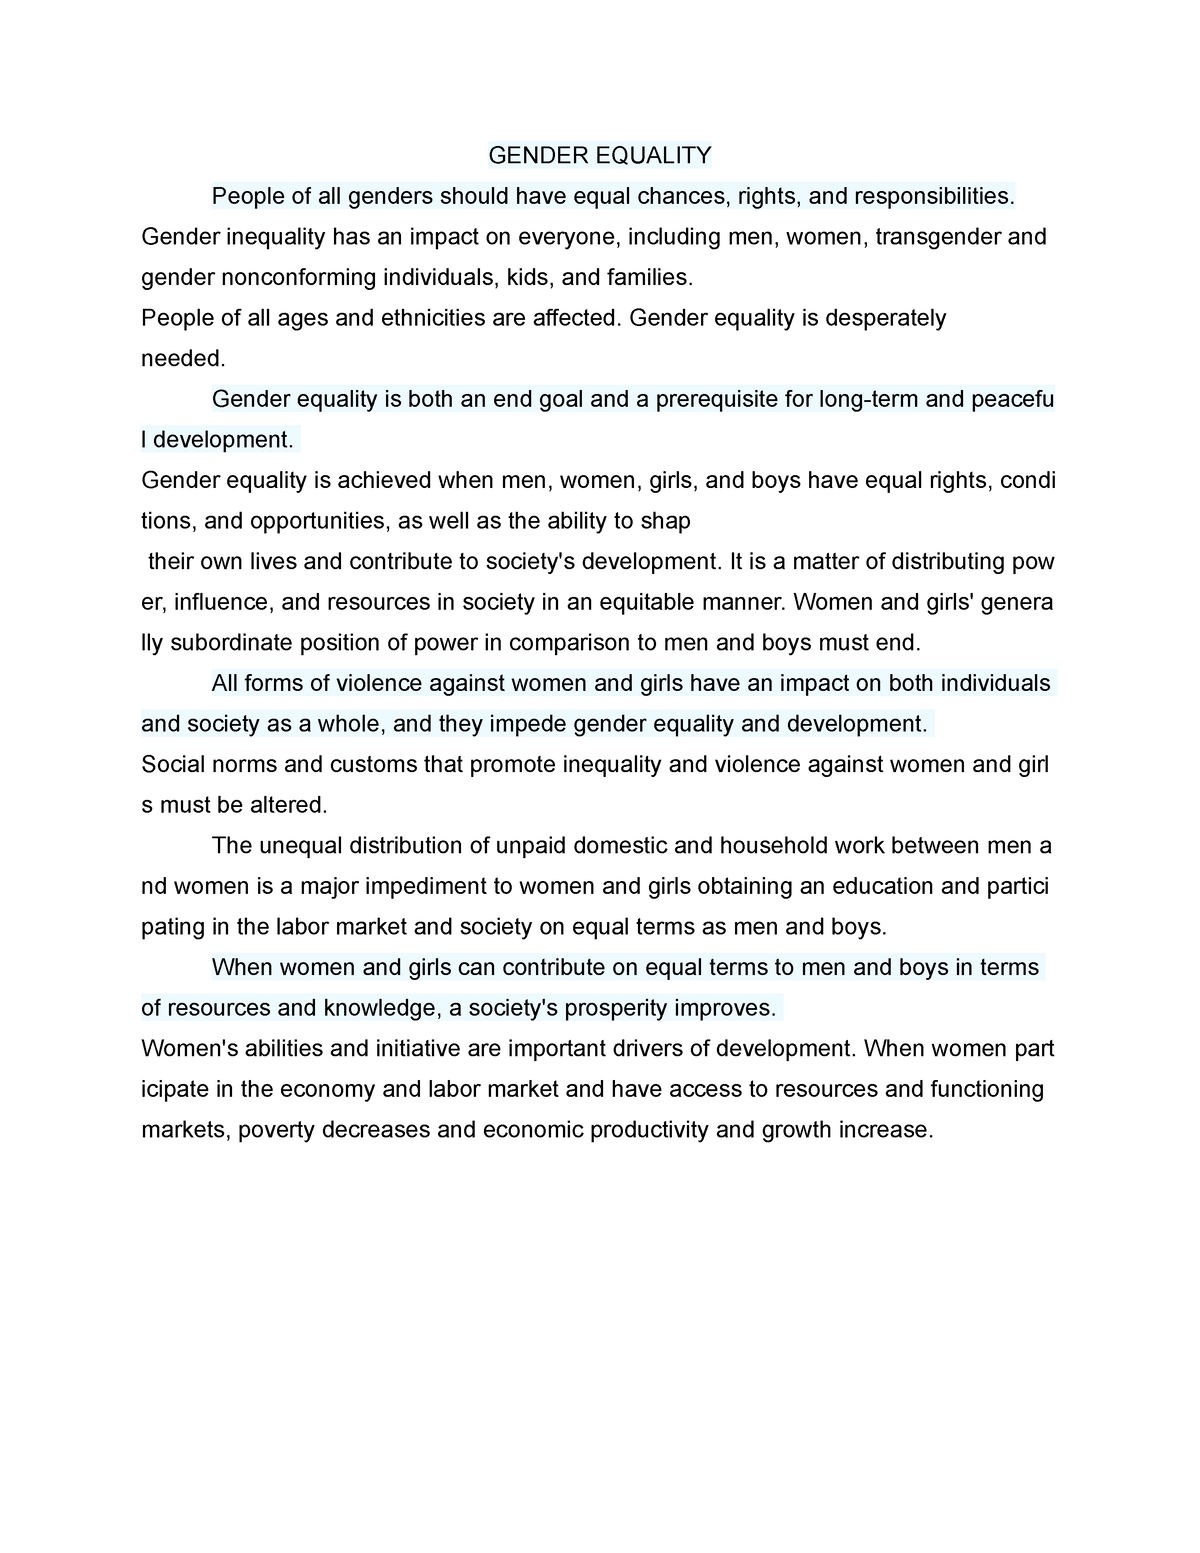 essay on gender equality in 21st century